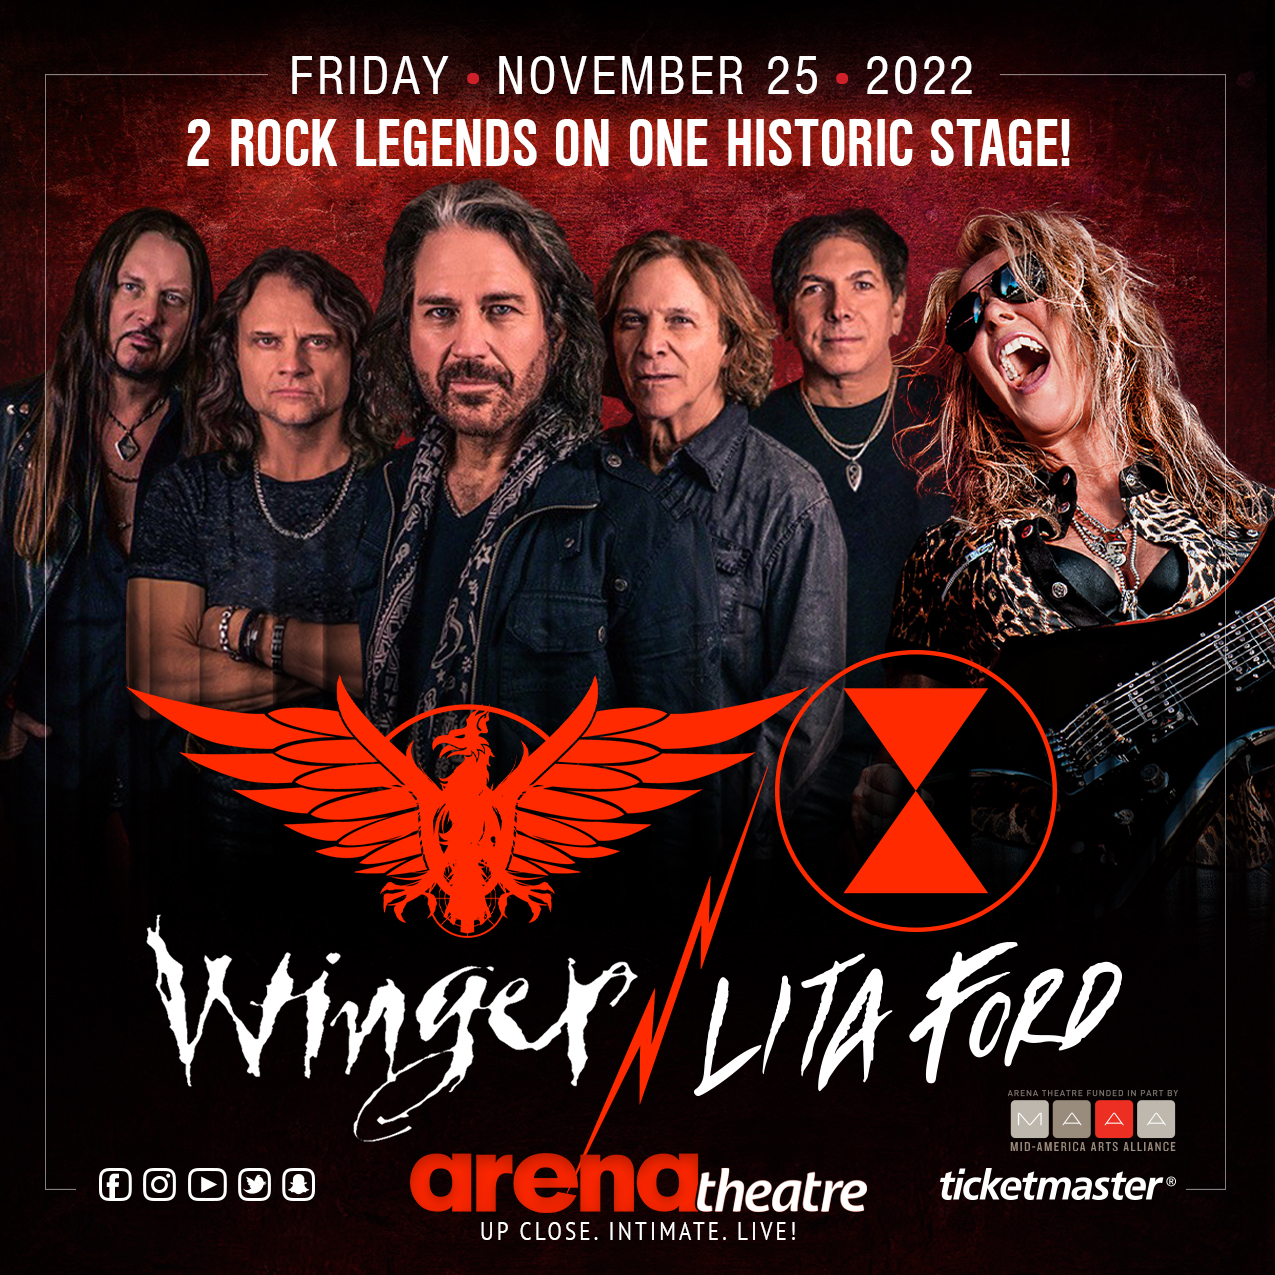 Winger With Lita Ford